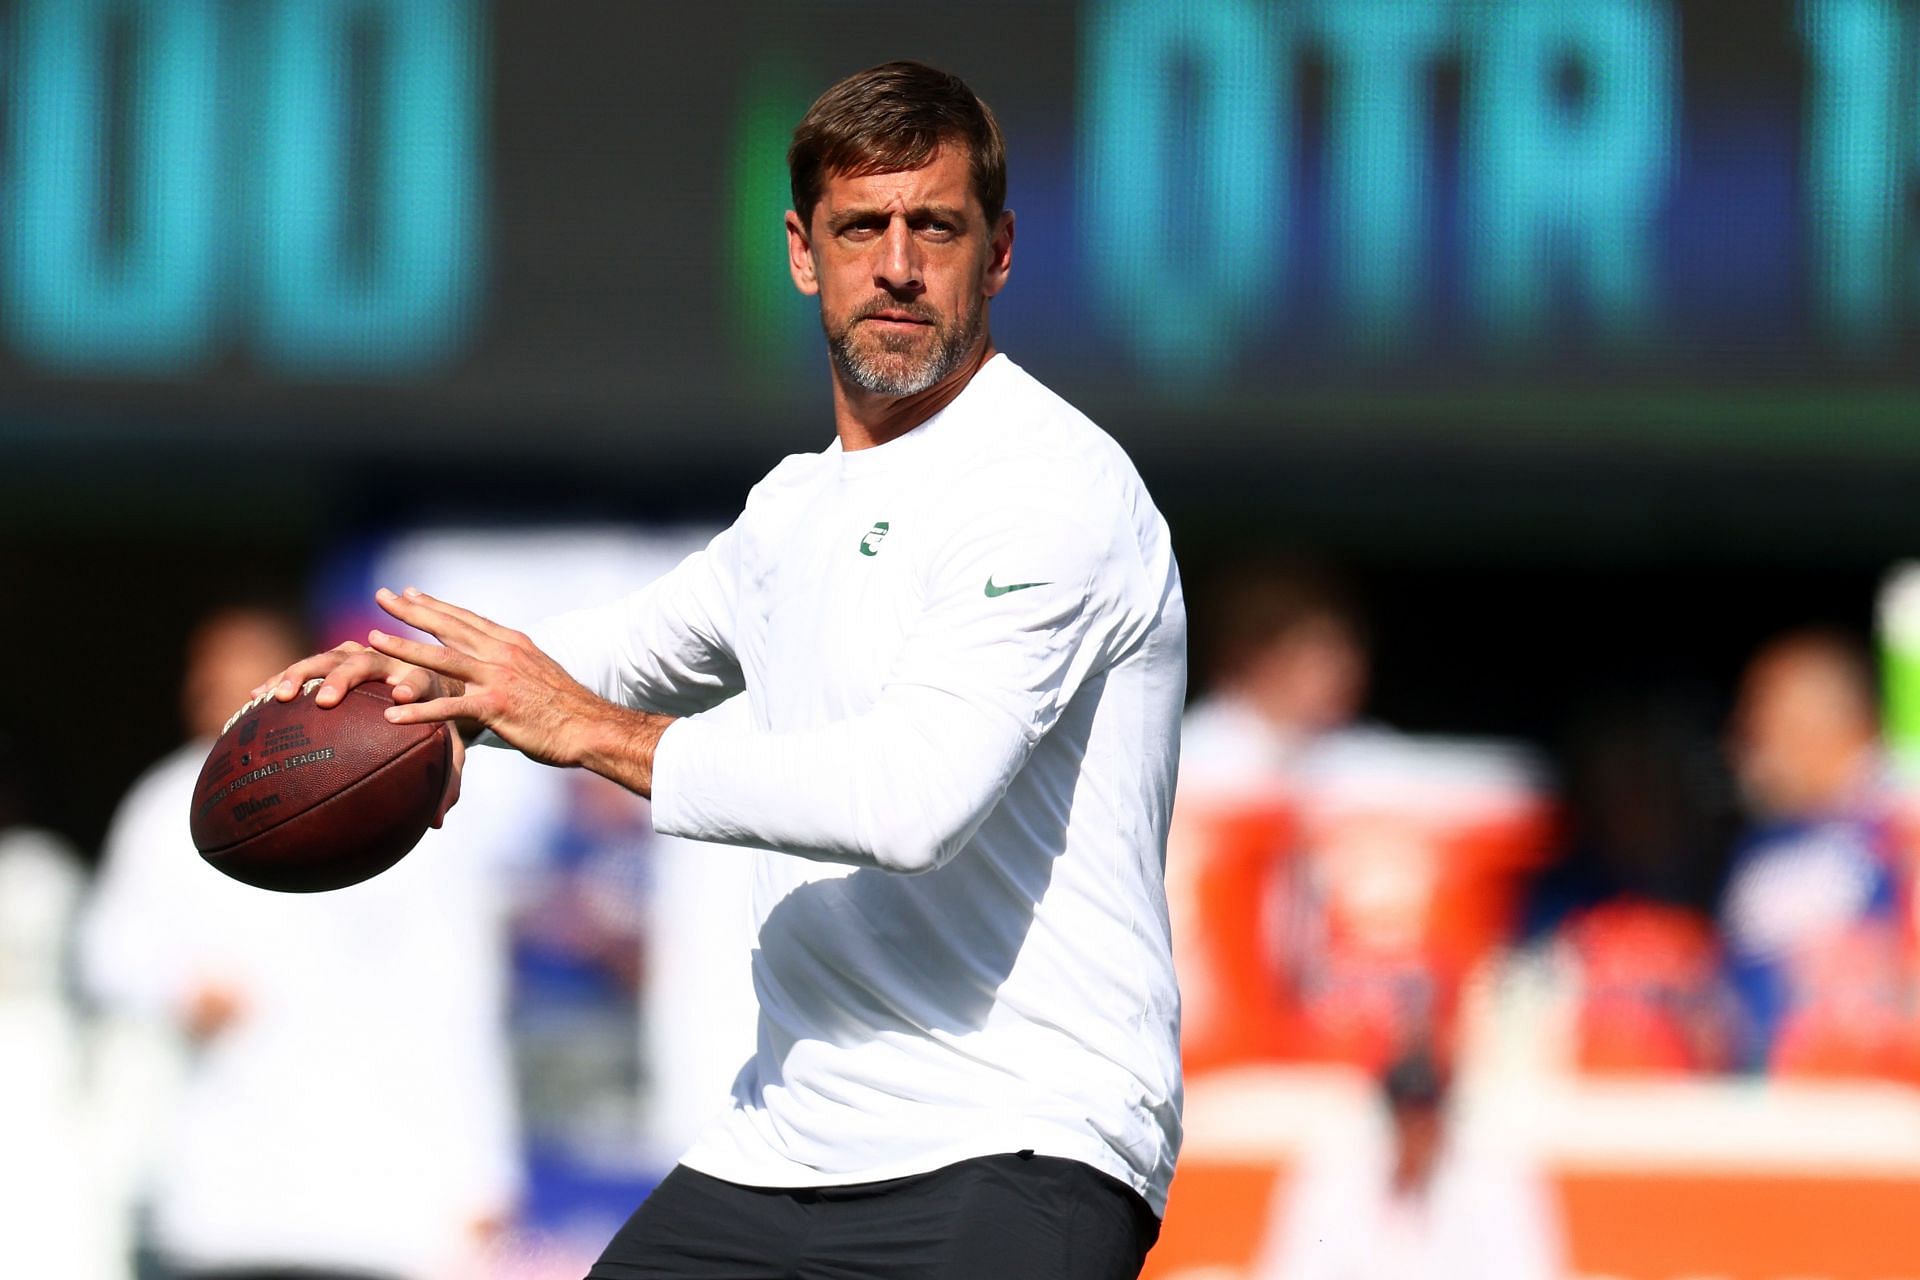 Aaron Rodgers at New York Jets v New York Giants